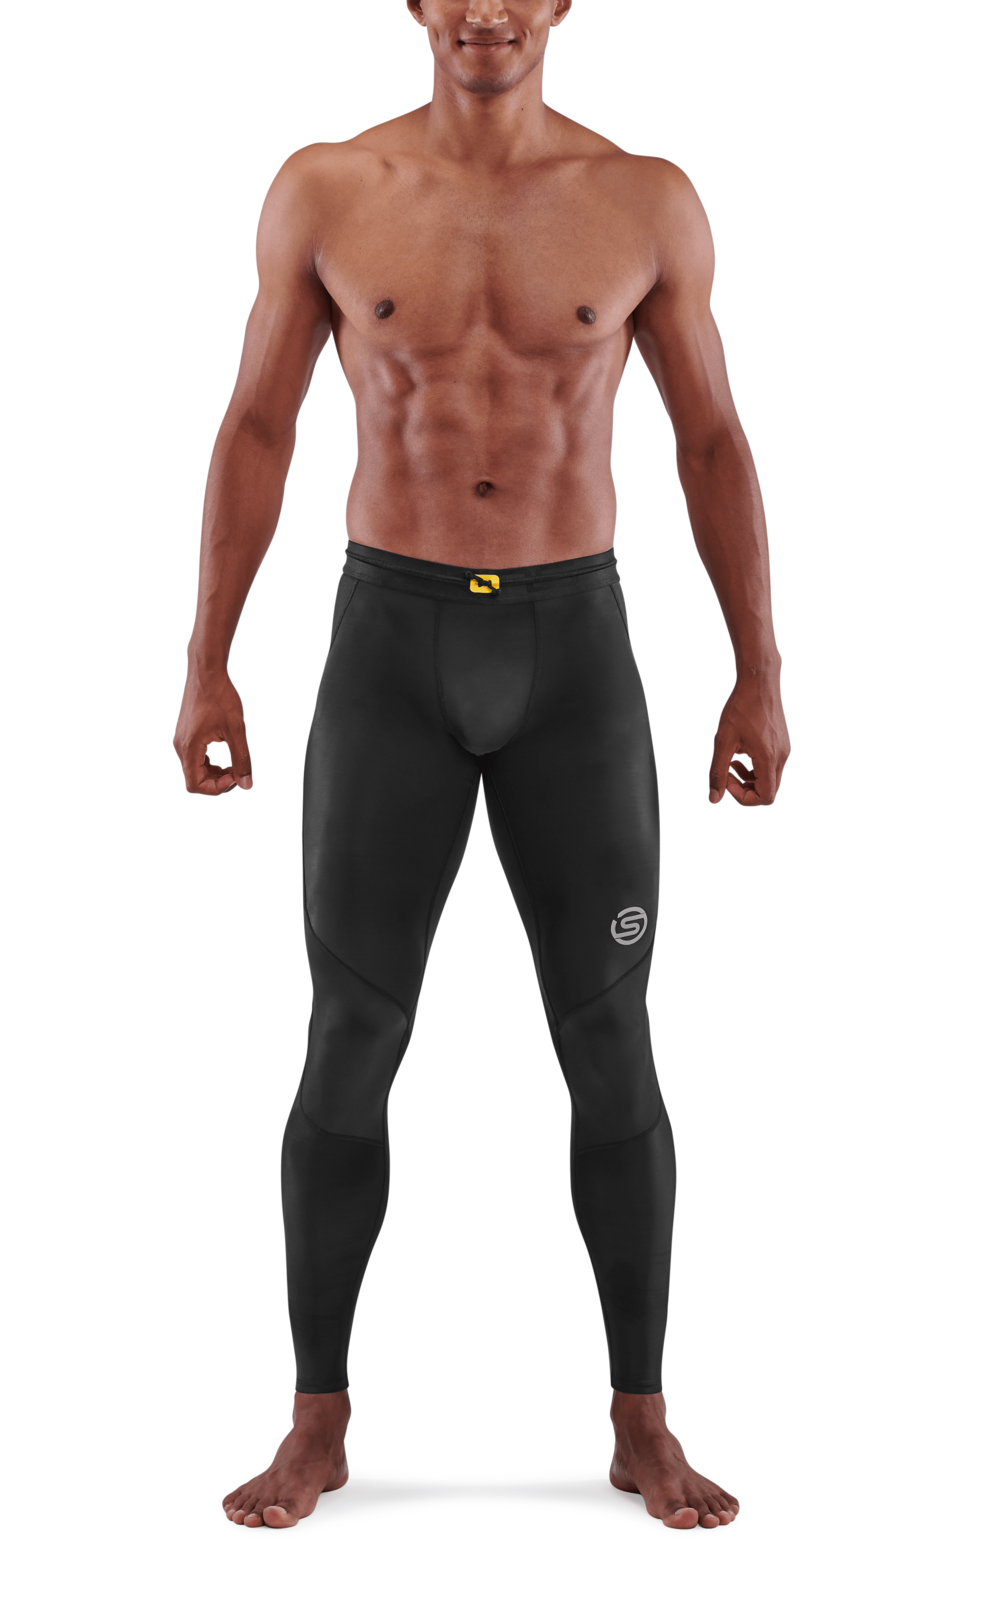 SKINS SERIES-3 MEN'S RECOVERY LONG TIGHTS BLACK/GRAPHITE - SKINS